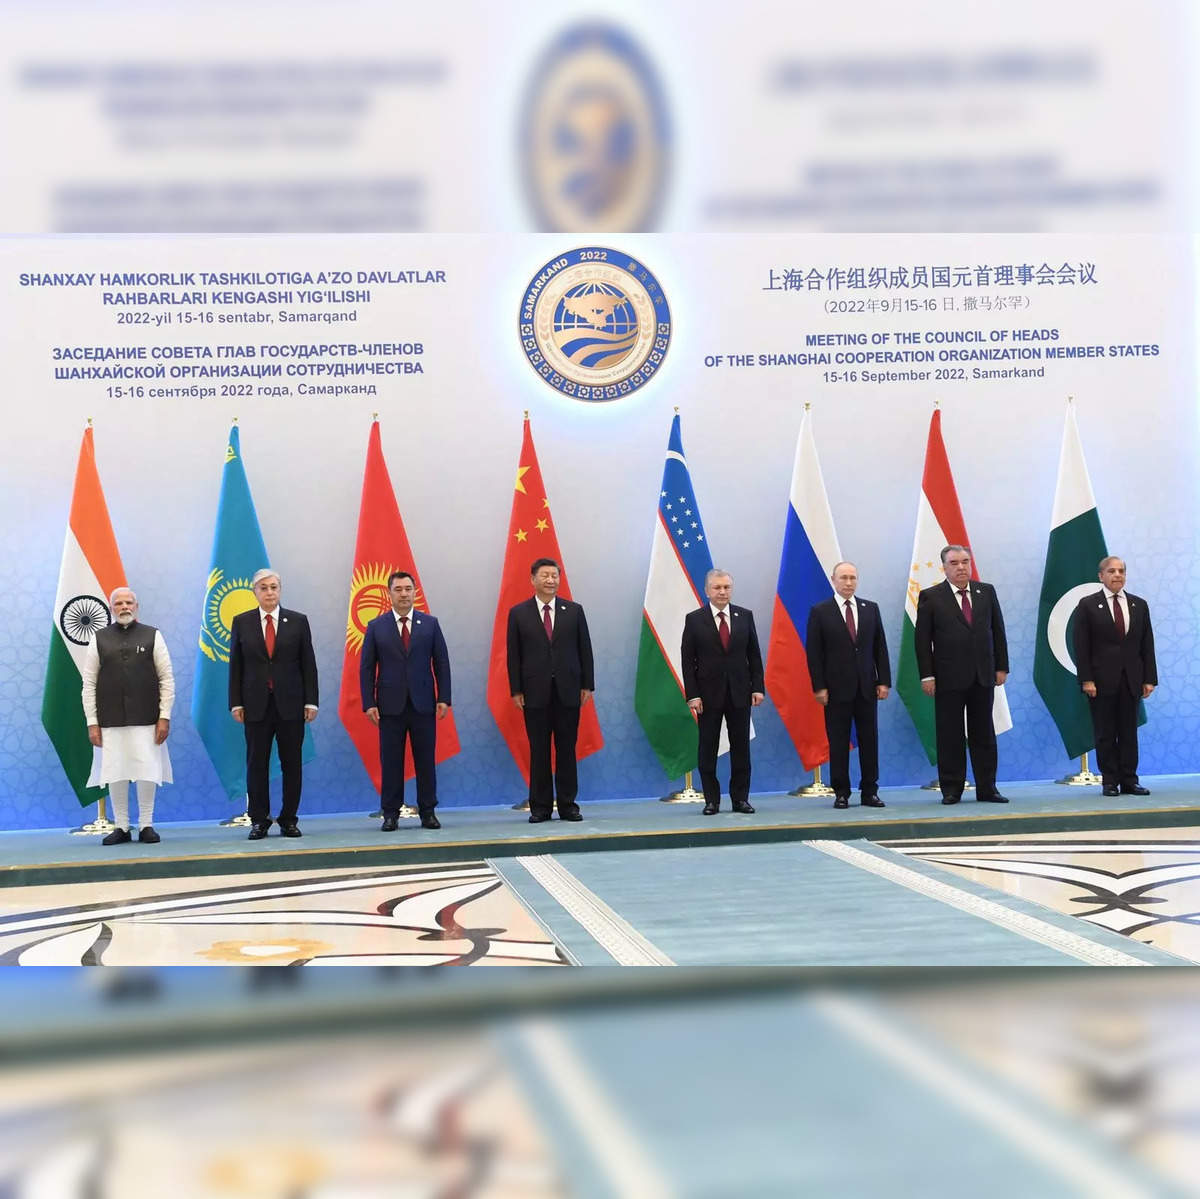 sco: Kazakhstan takes over SCO Presidency from India after next week's  Summit - The Economic Times